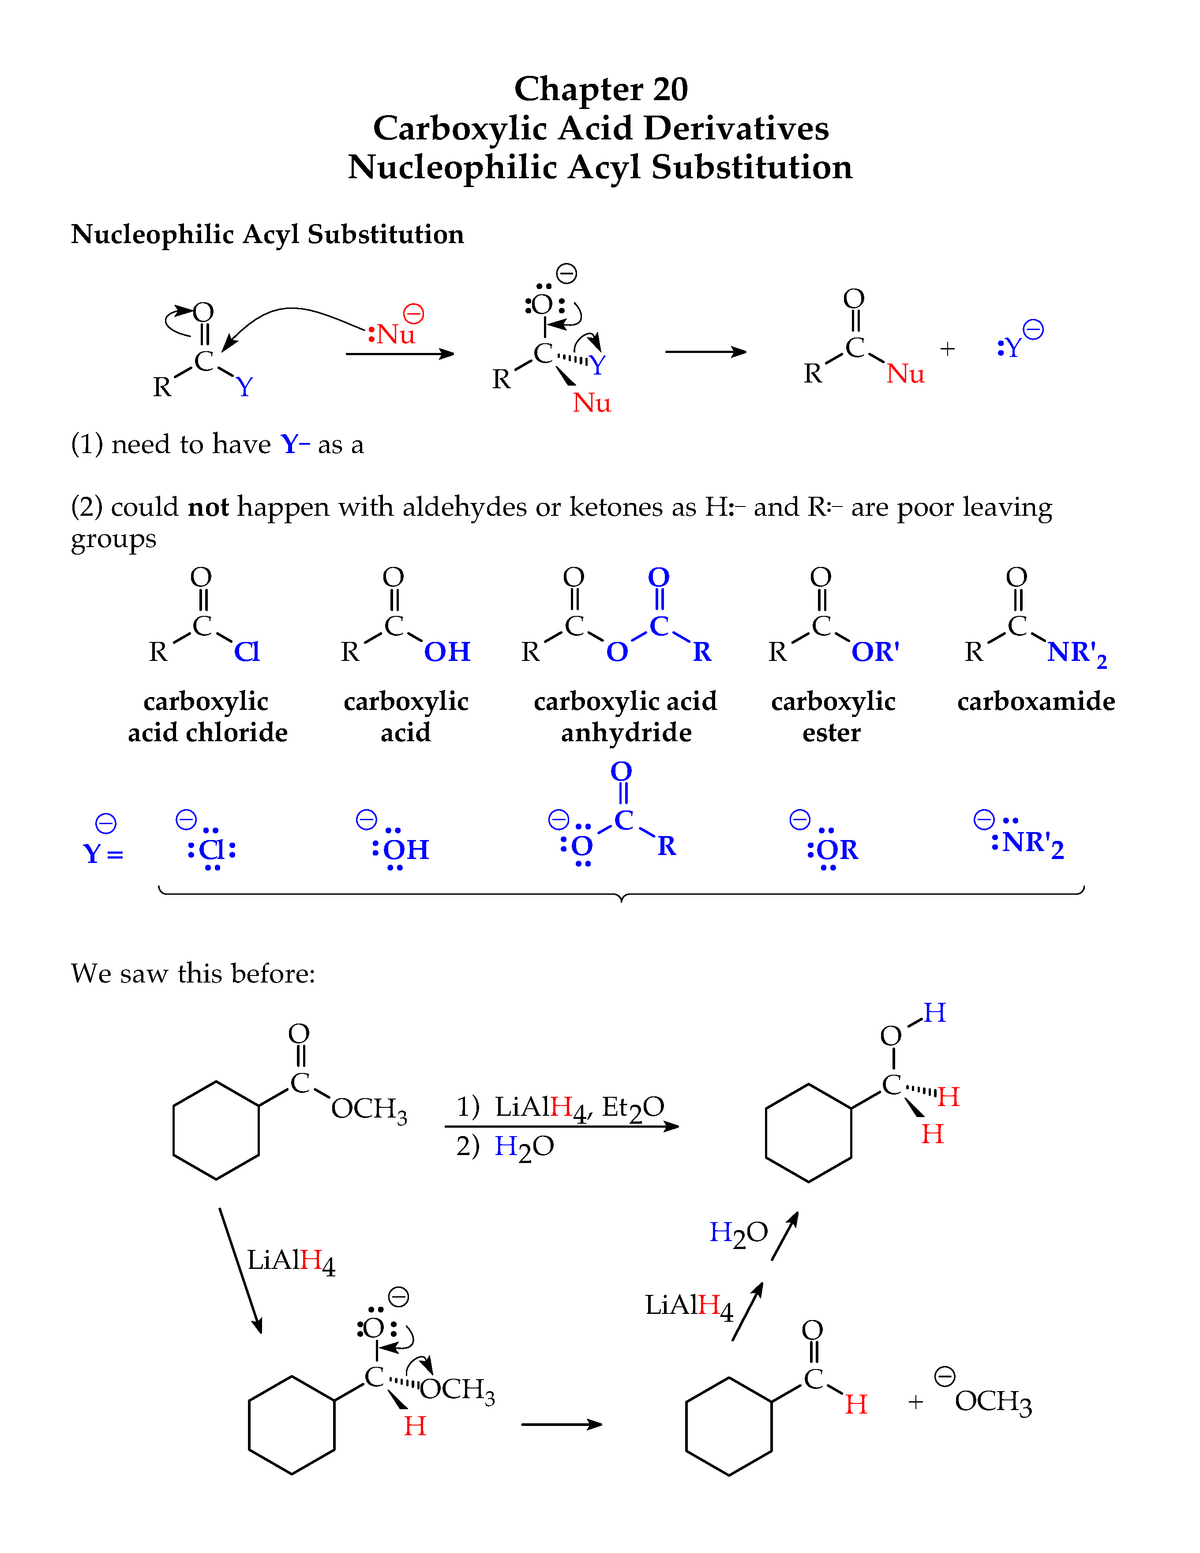 can ethers be nucleophilic